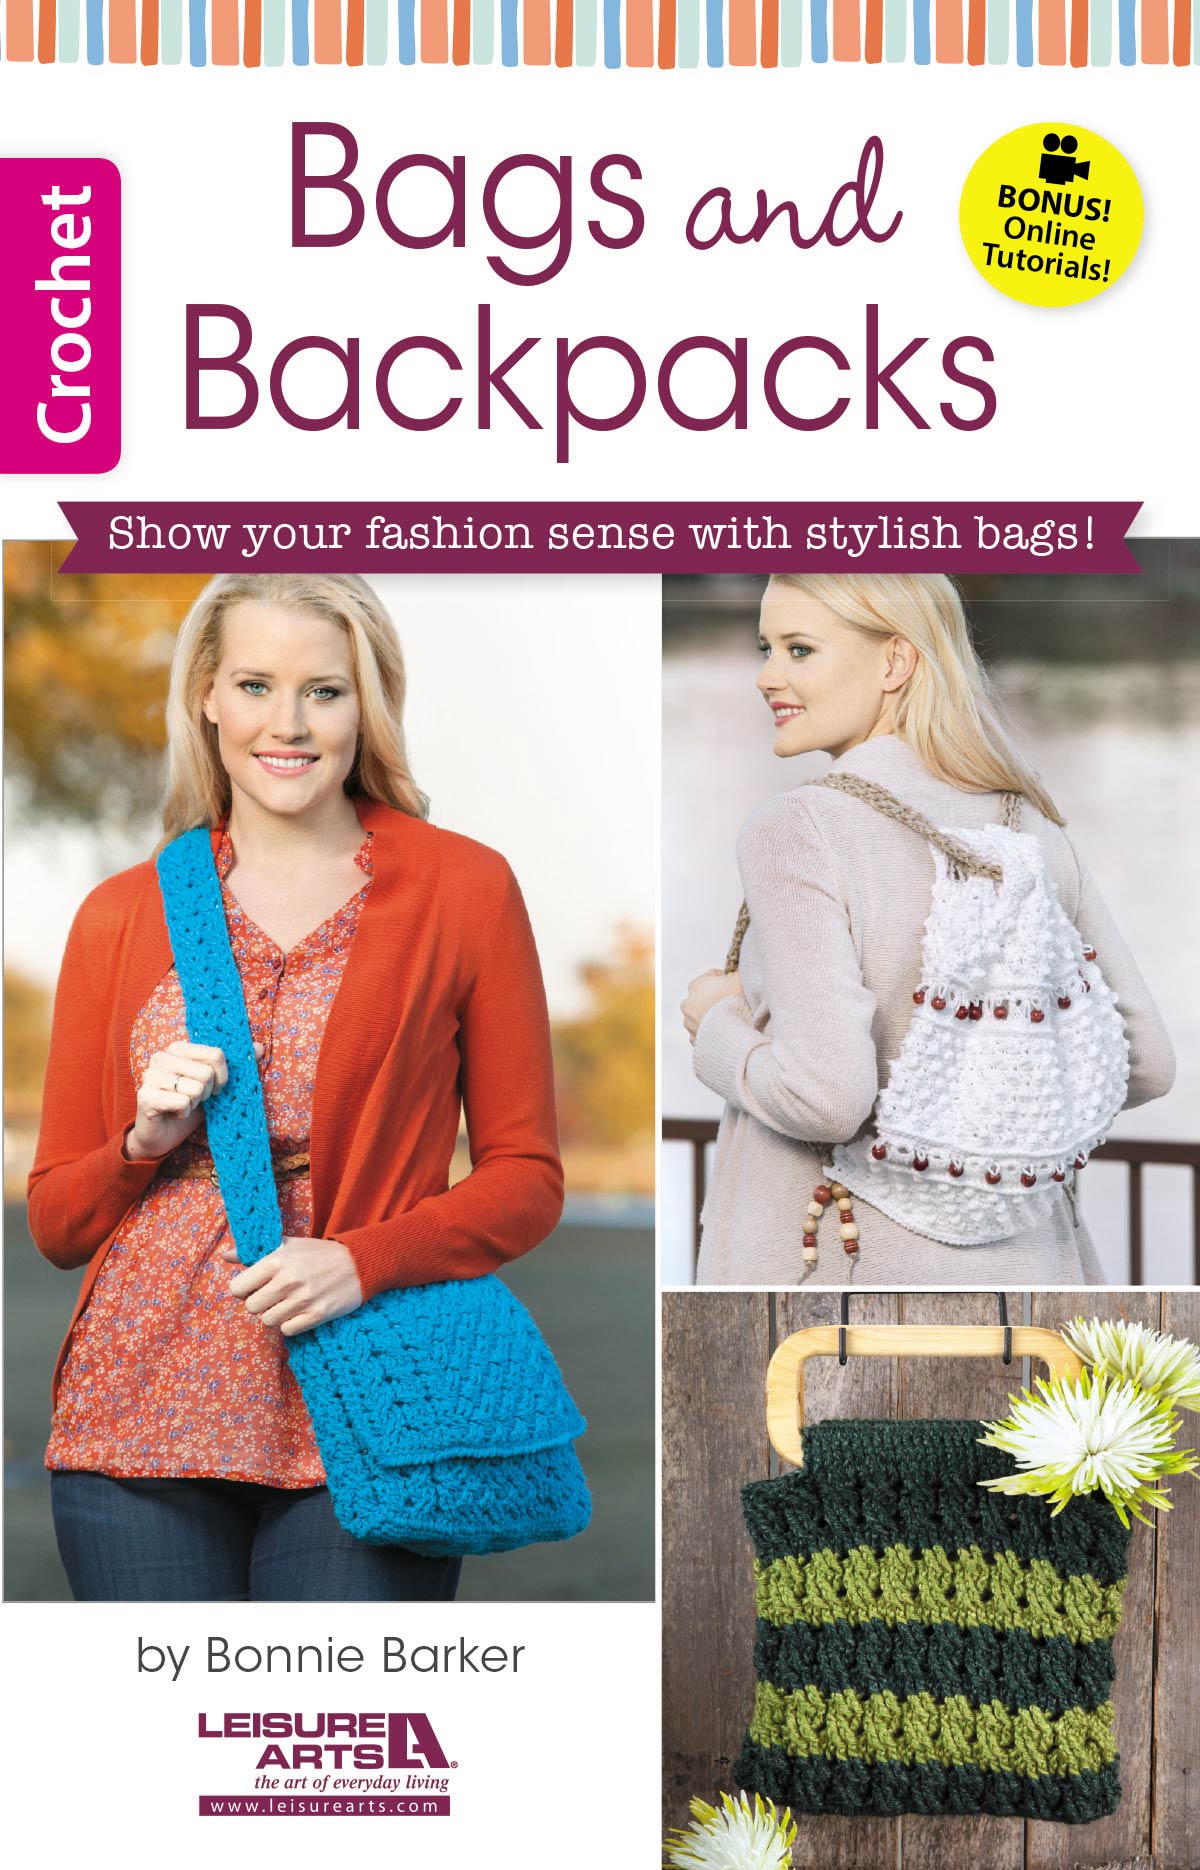 Leisure Arts Bags and Backpacks Crochet Book